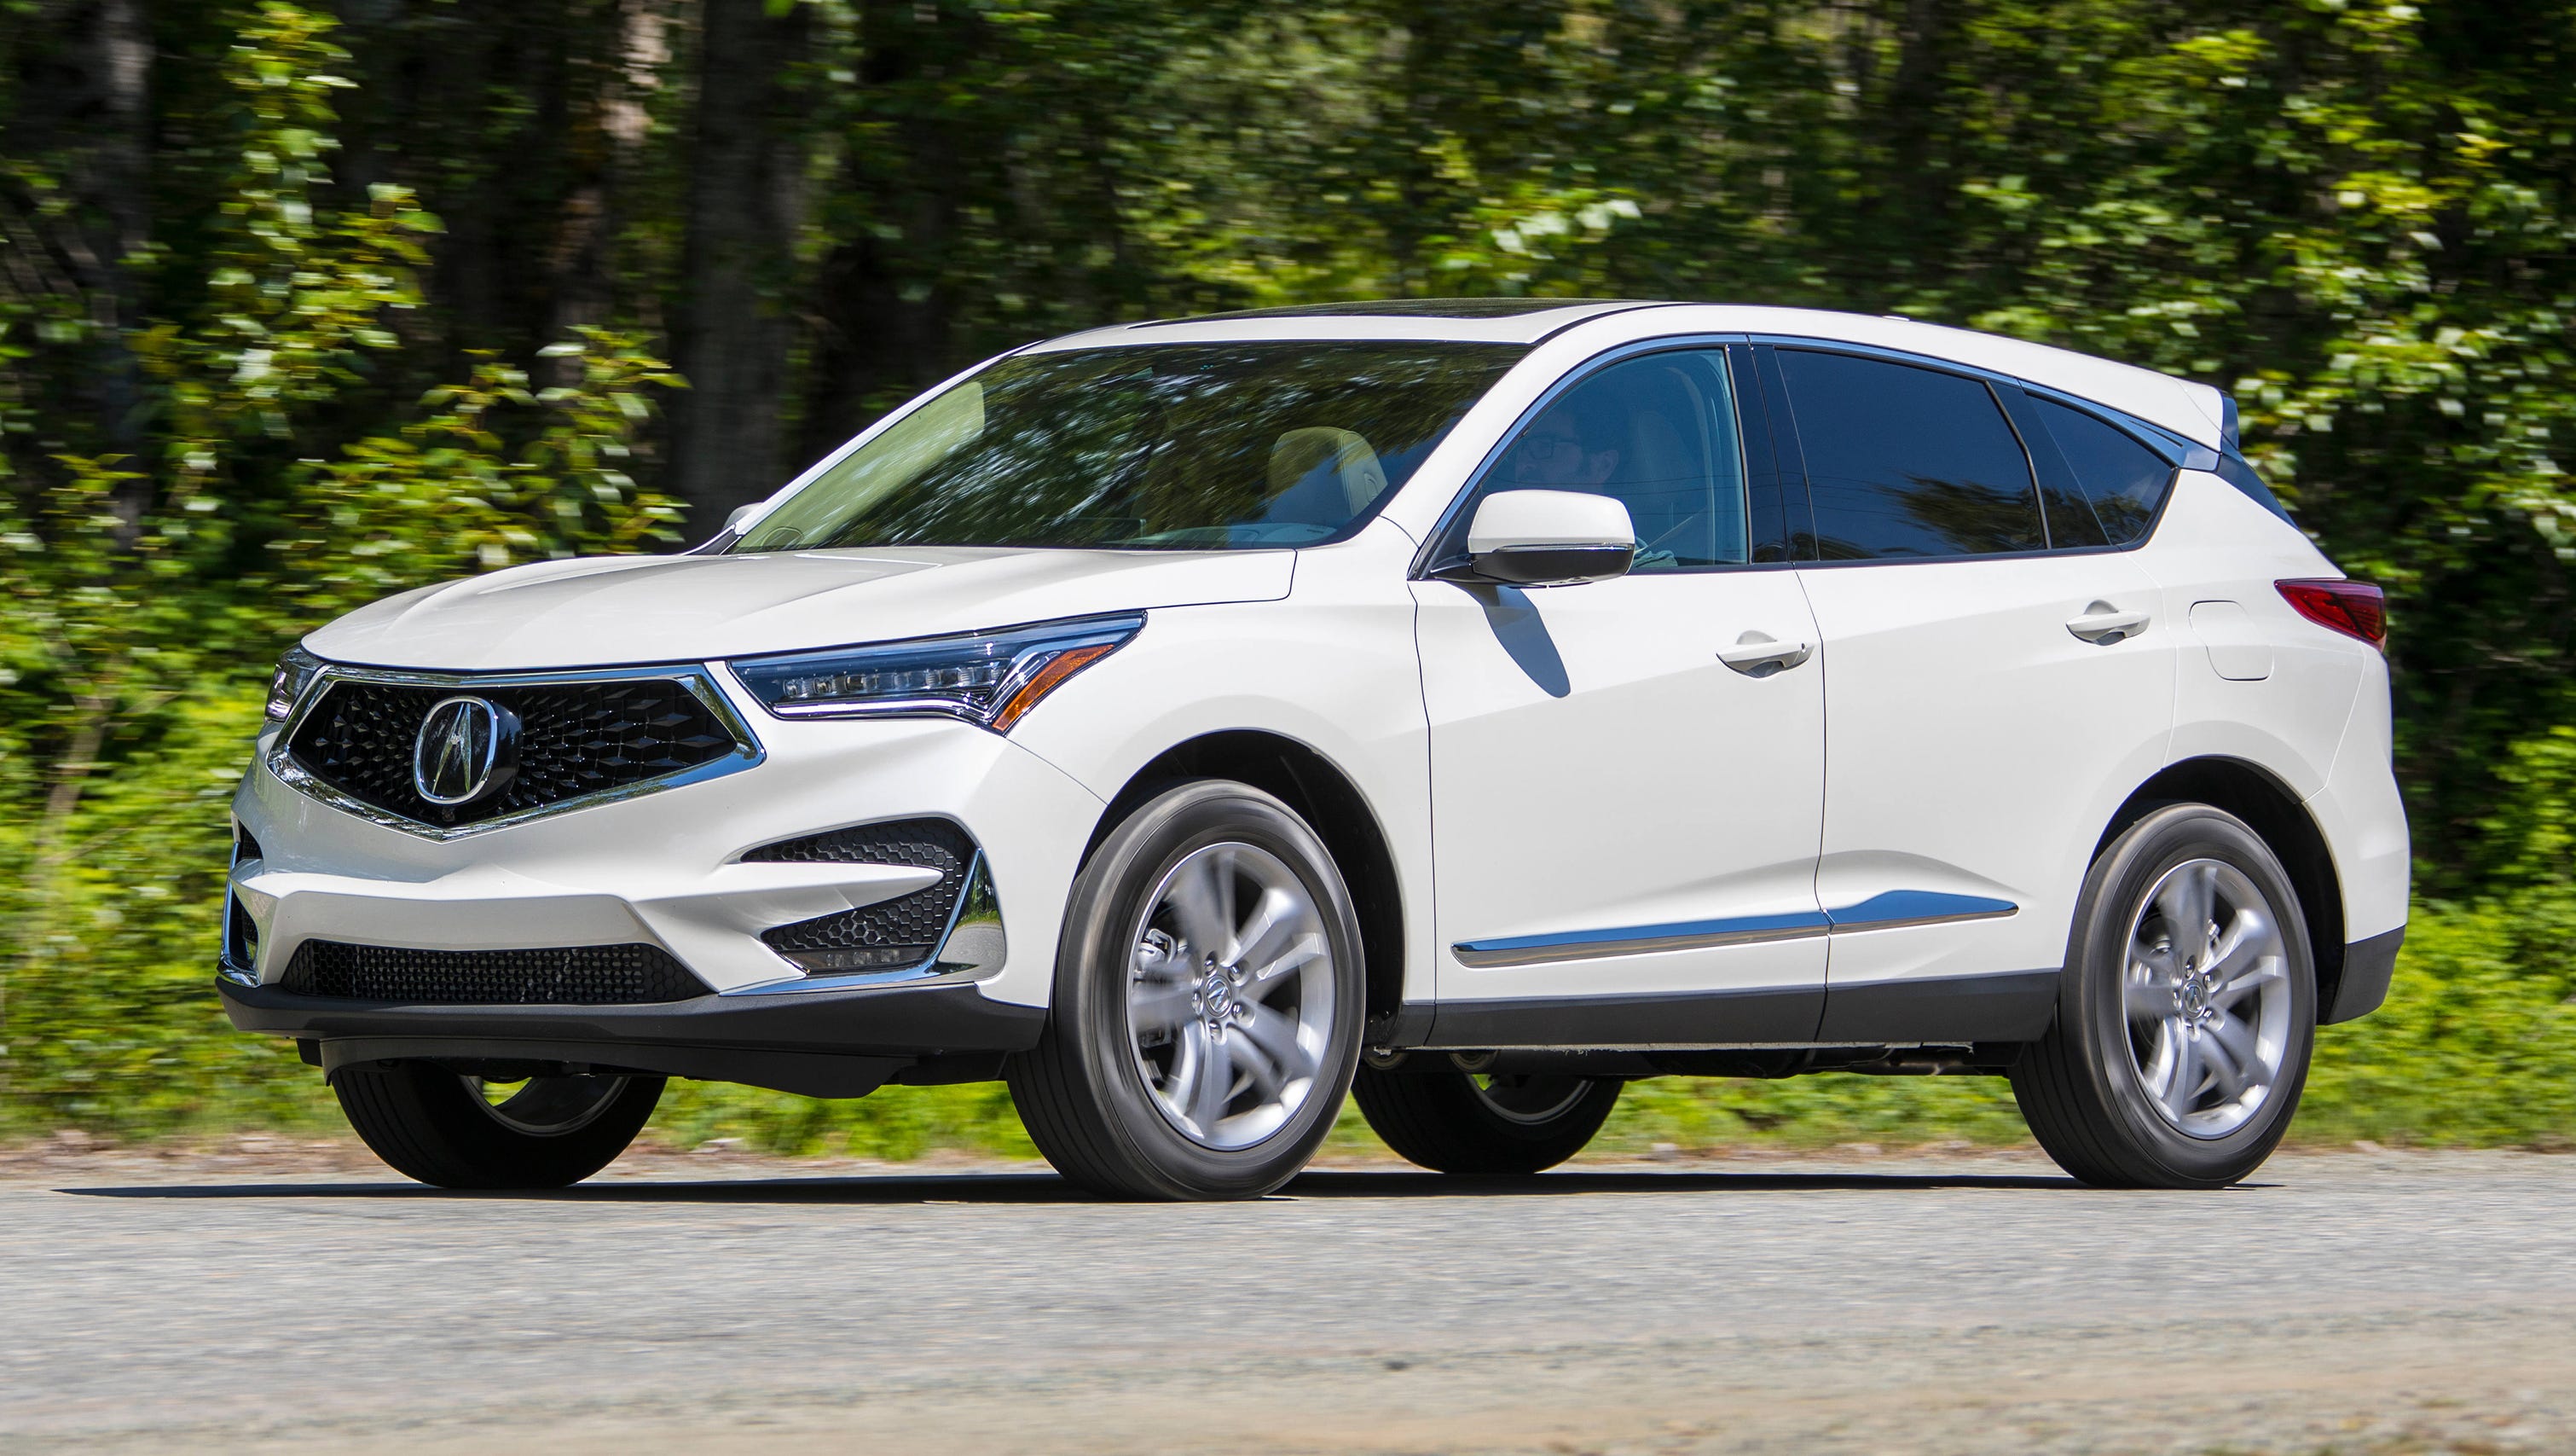 2019 Acura RDX review Price, power drive SUV forward